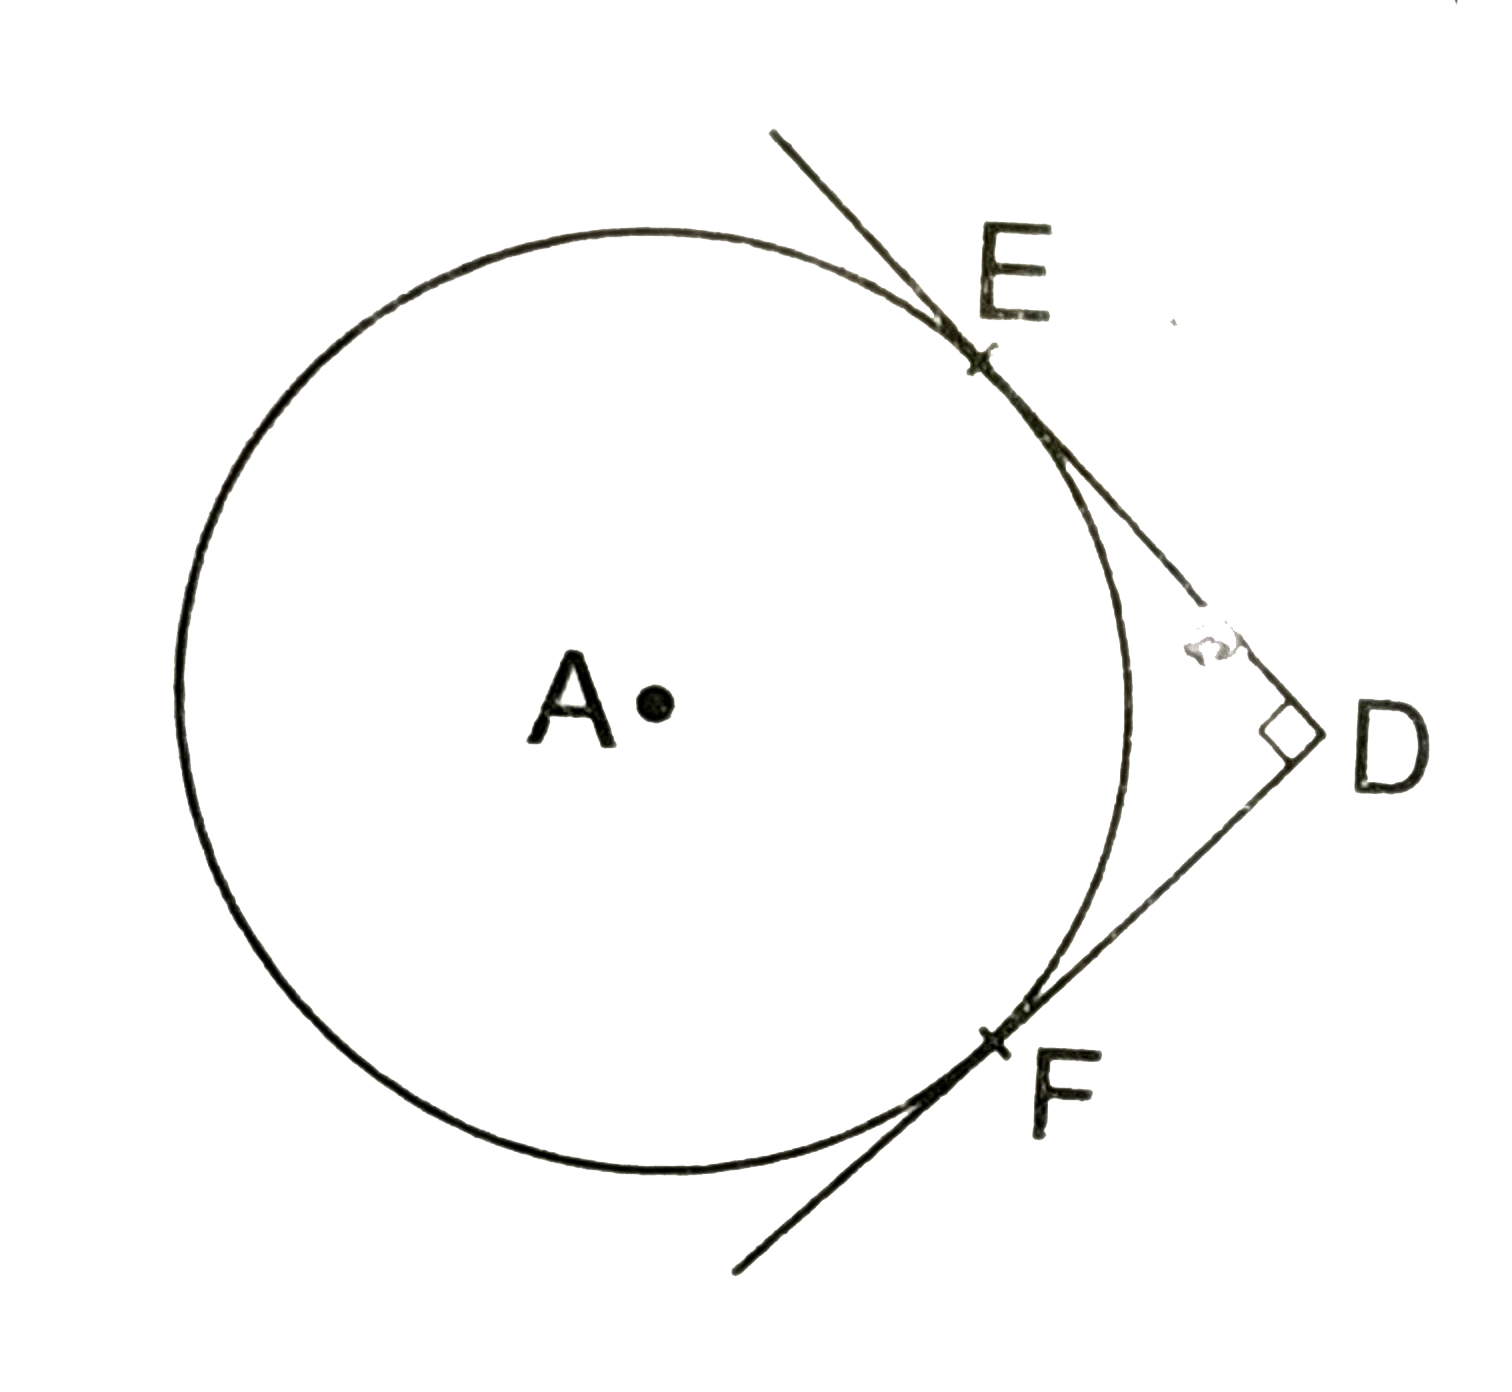 In the given figure, DE and DF are tangents from and external point D to a circle with centre A. If DE=5cm and DEbotDF then the radius of the circle is